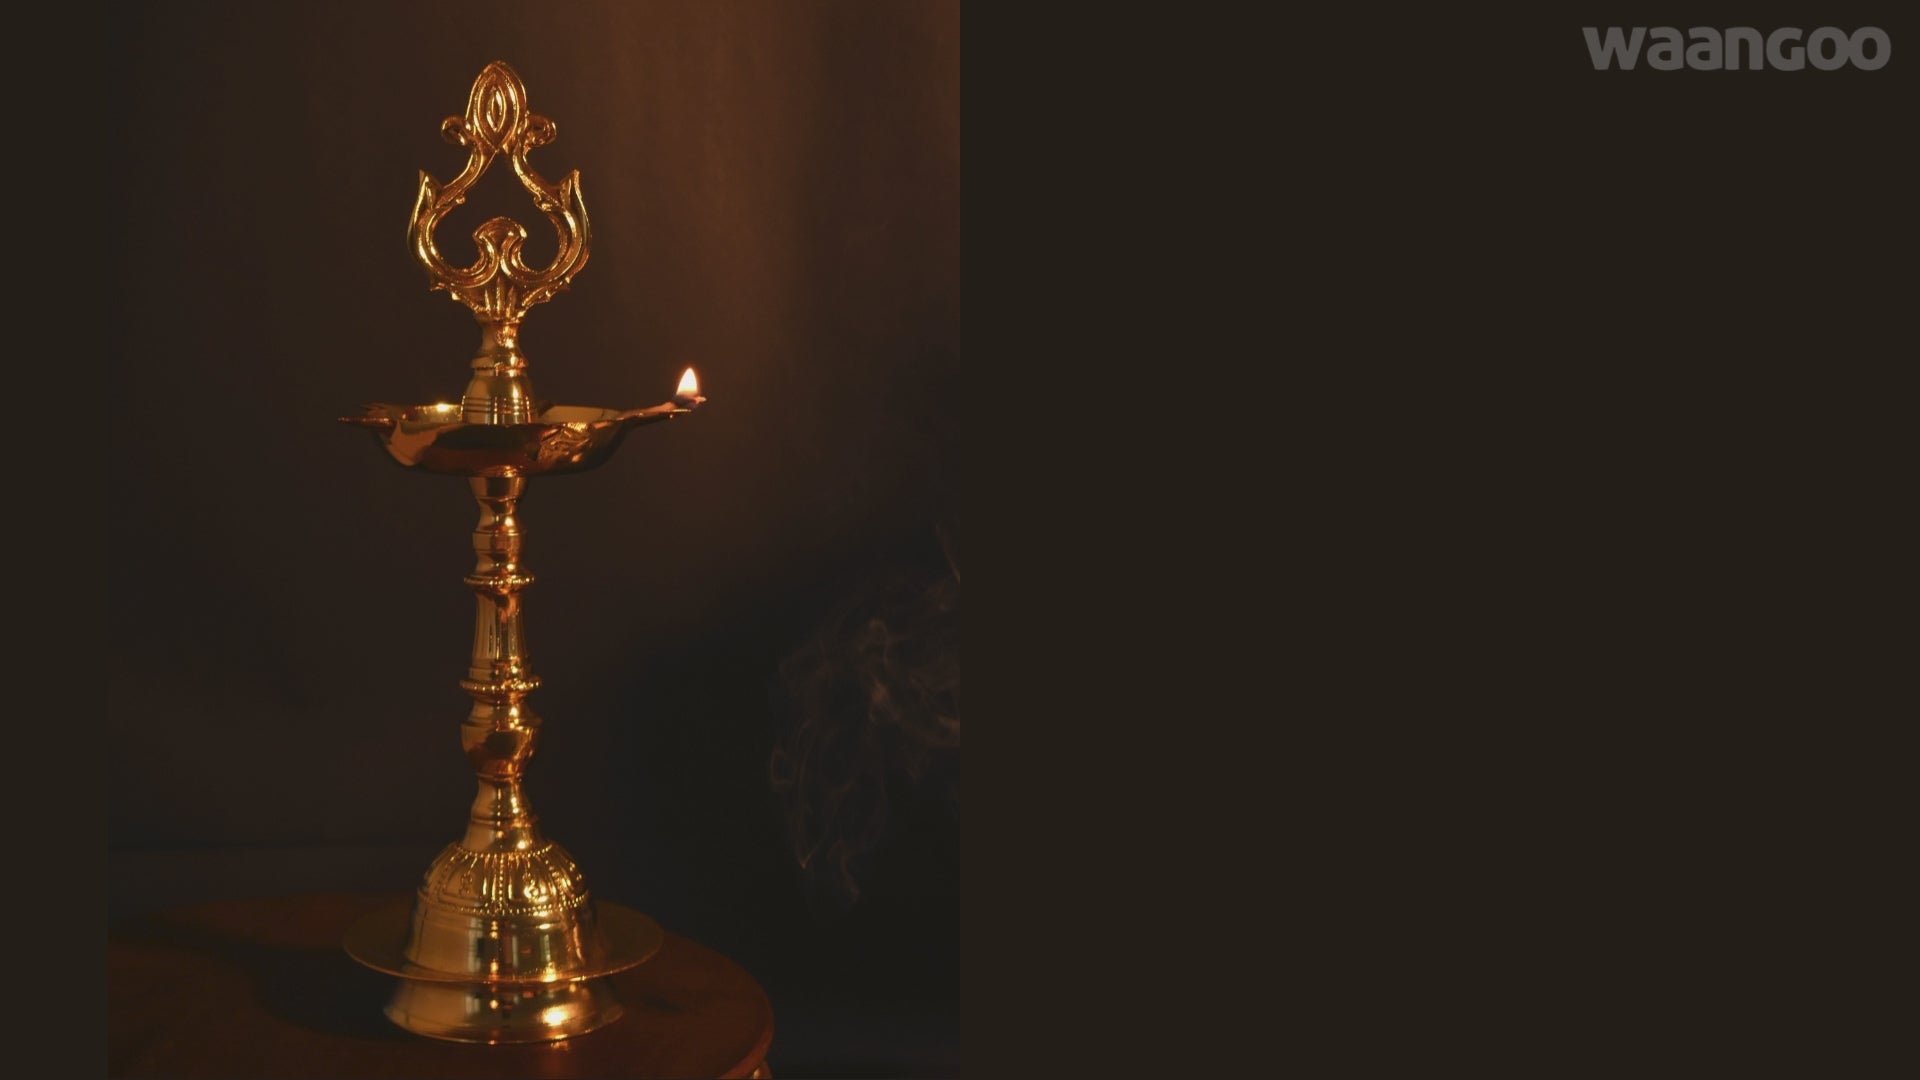 Brass Kashi Muruga Lamp Gold Plated Specially From Nachiyarkovil Kumbakonam (10 SGD For Preorder & Delivery In 15 Days) - 2 Pc